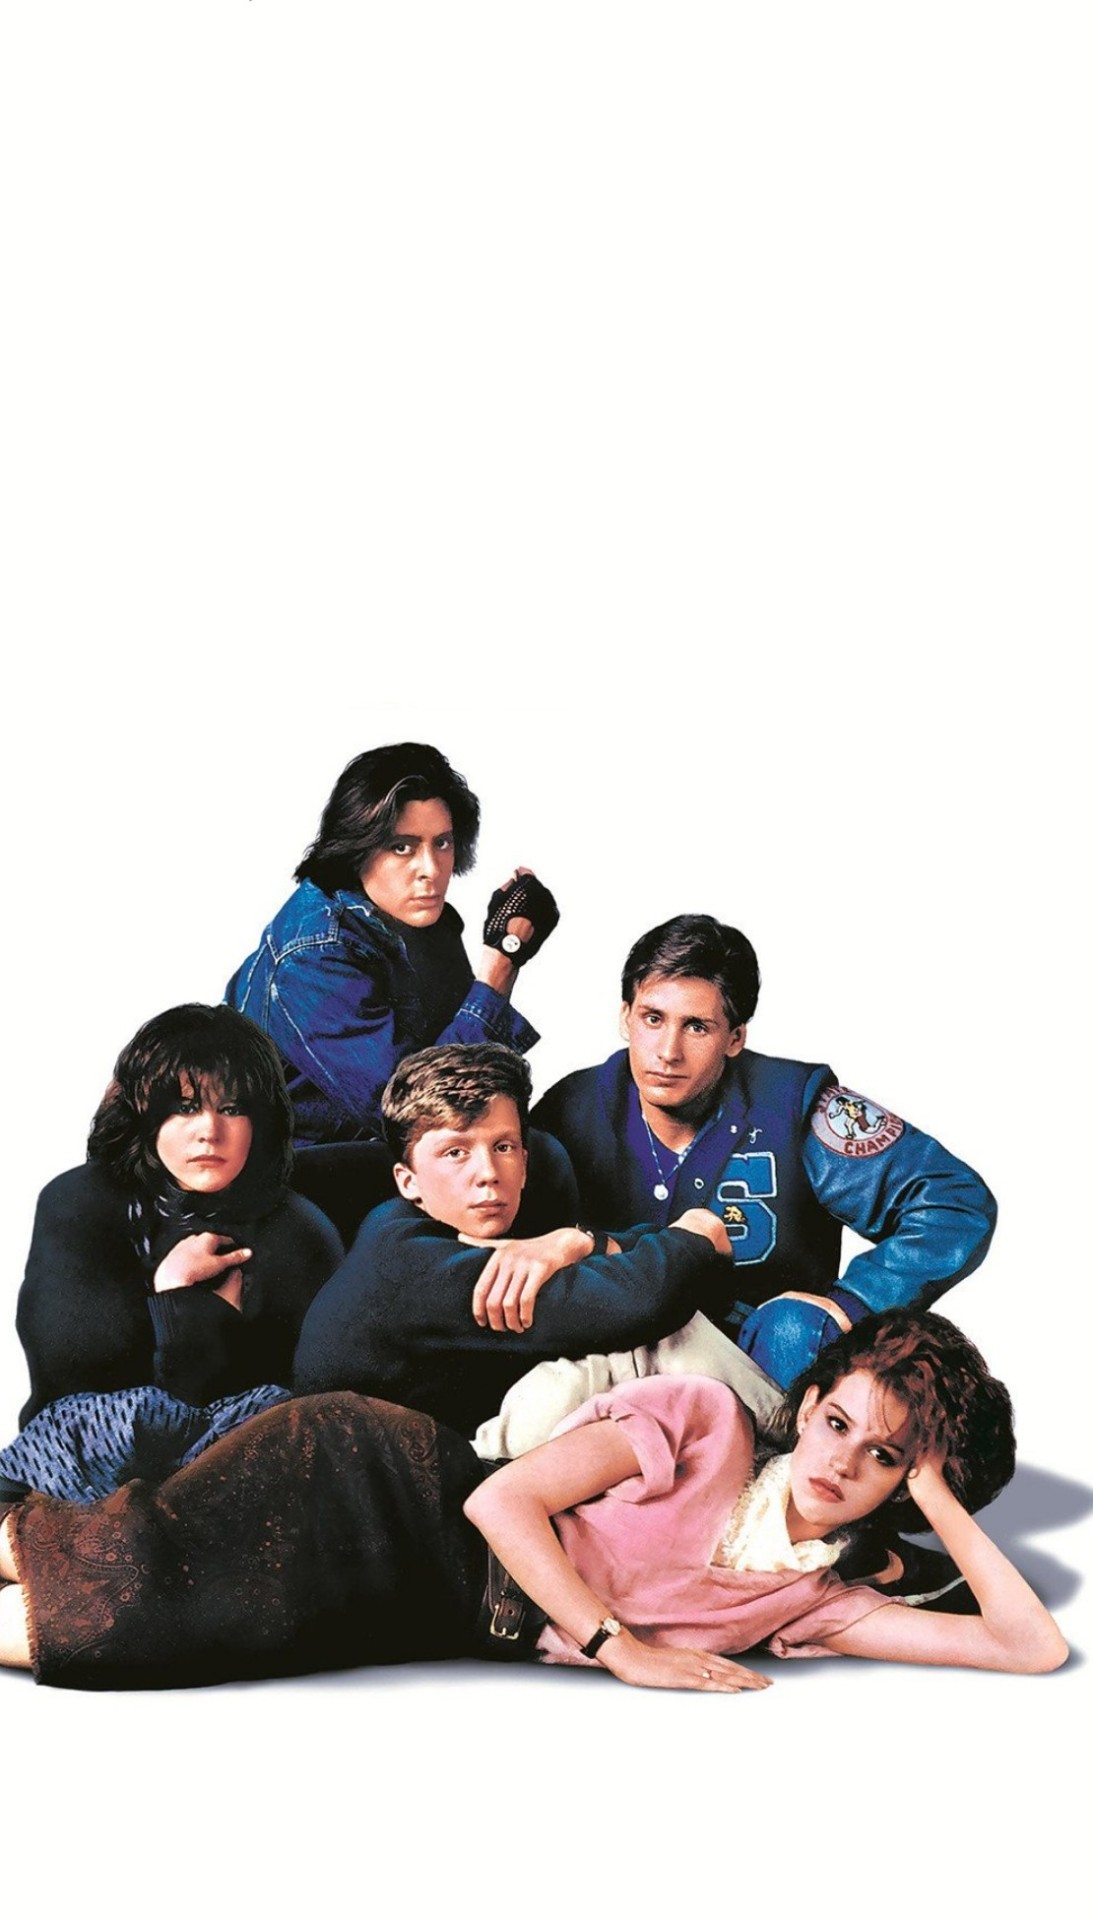 20 The Breakfast Club HD Wallpapers and Backgrounds